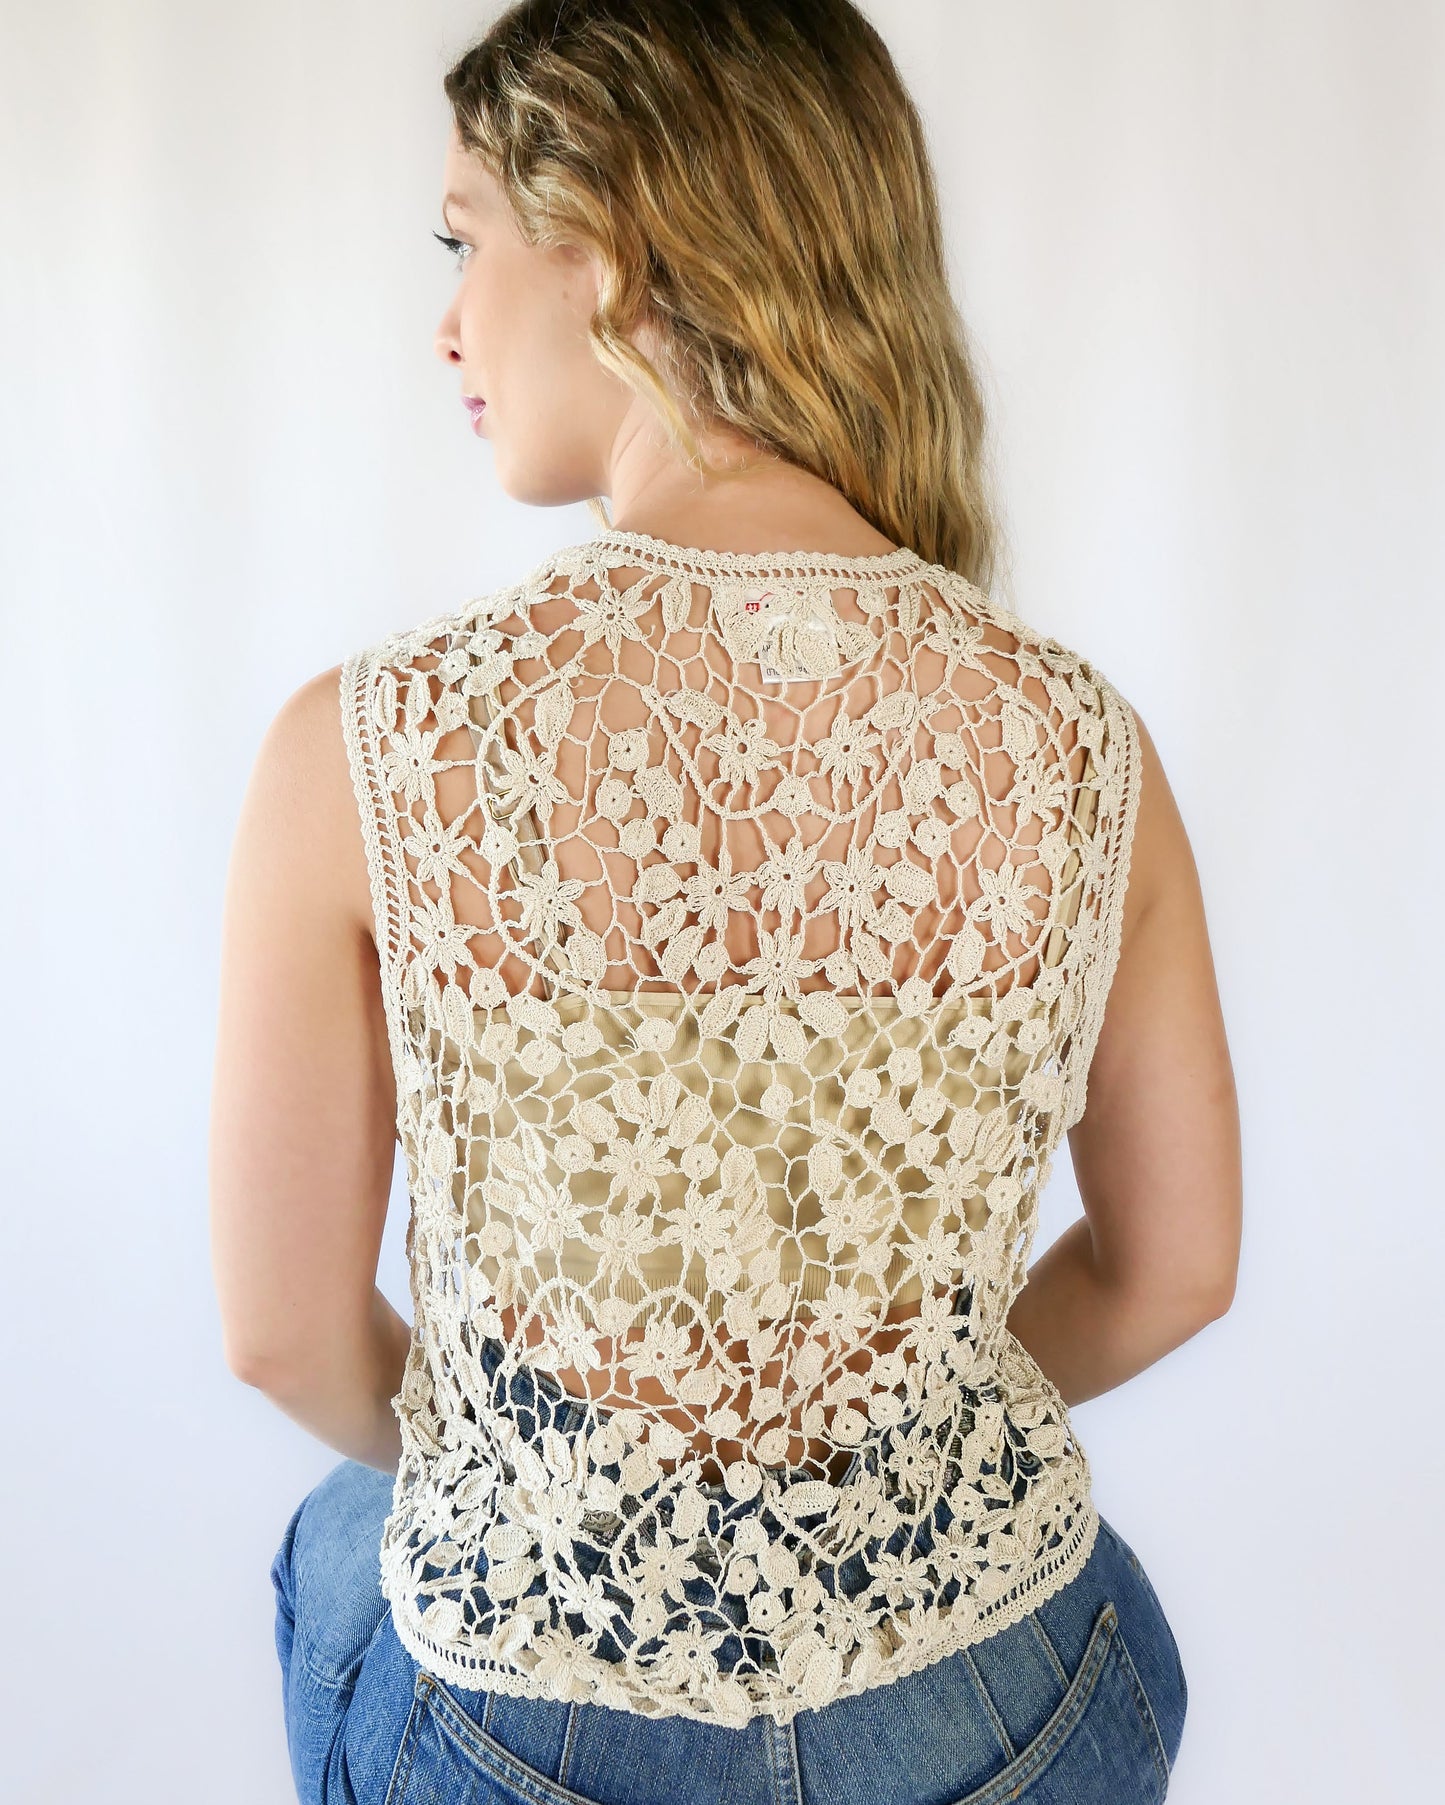 This Lim's Vintage hand crocheted vest with an intricate floral and leaf pattern adds a vintage flair to your usual everyday jeans-and-white-shirt attire.  Buttons up the front but can also be left open and worn over a bikini bra, tank top, or even a long sleeve shirt or blouse during cooler months.   Size: One Size  Measurements:  Bust: 38”-41” Length: 21" Shoulder 15" Color: Natural  Material: 100% cotton